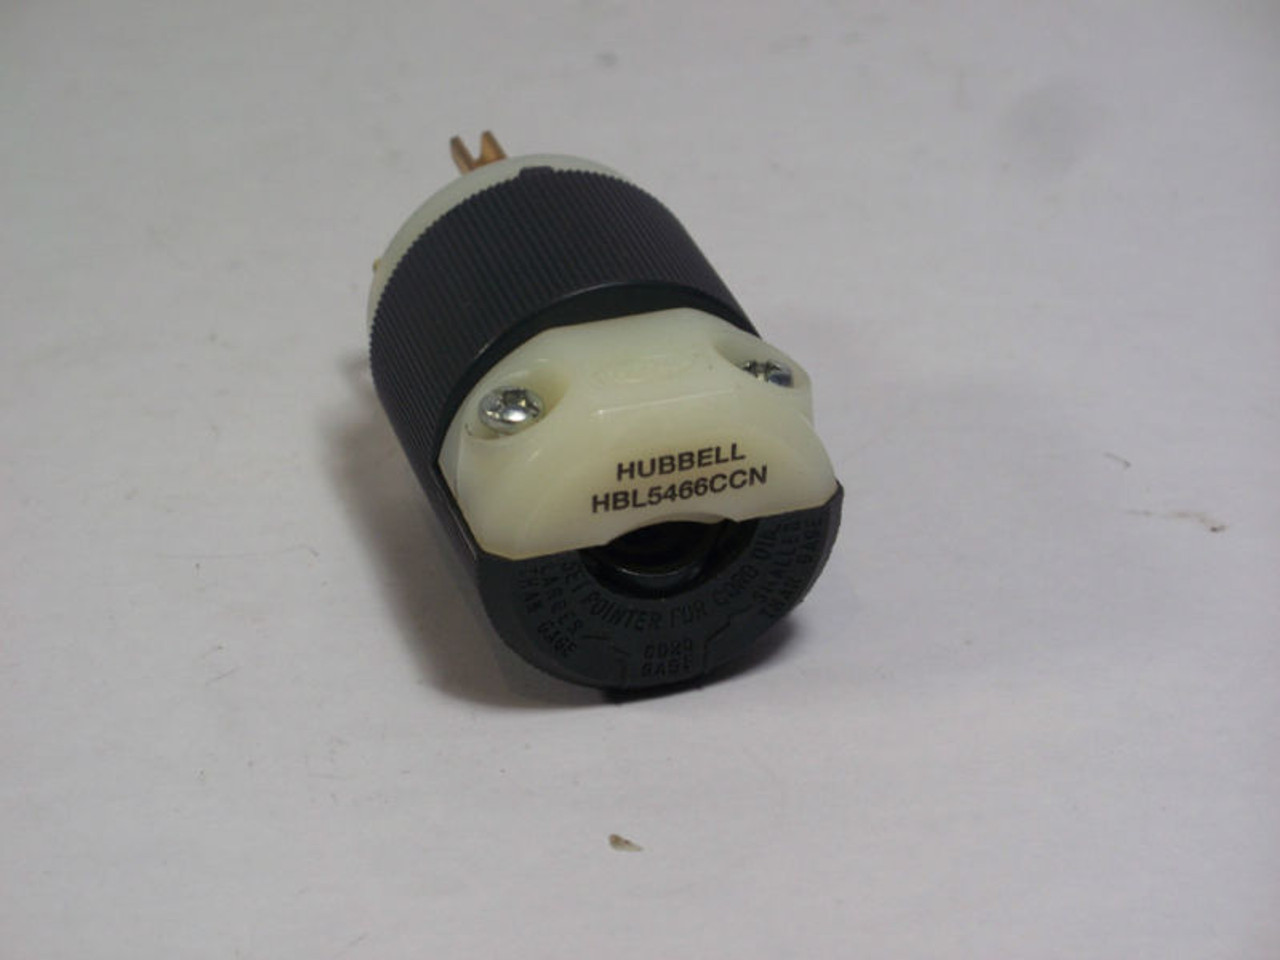 HUBBELL HBL5466CCN Insulgrip MALE Plug 20A 250V USED